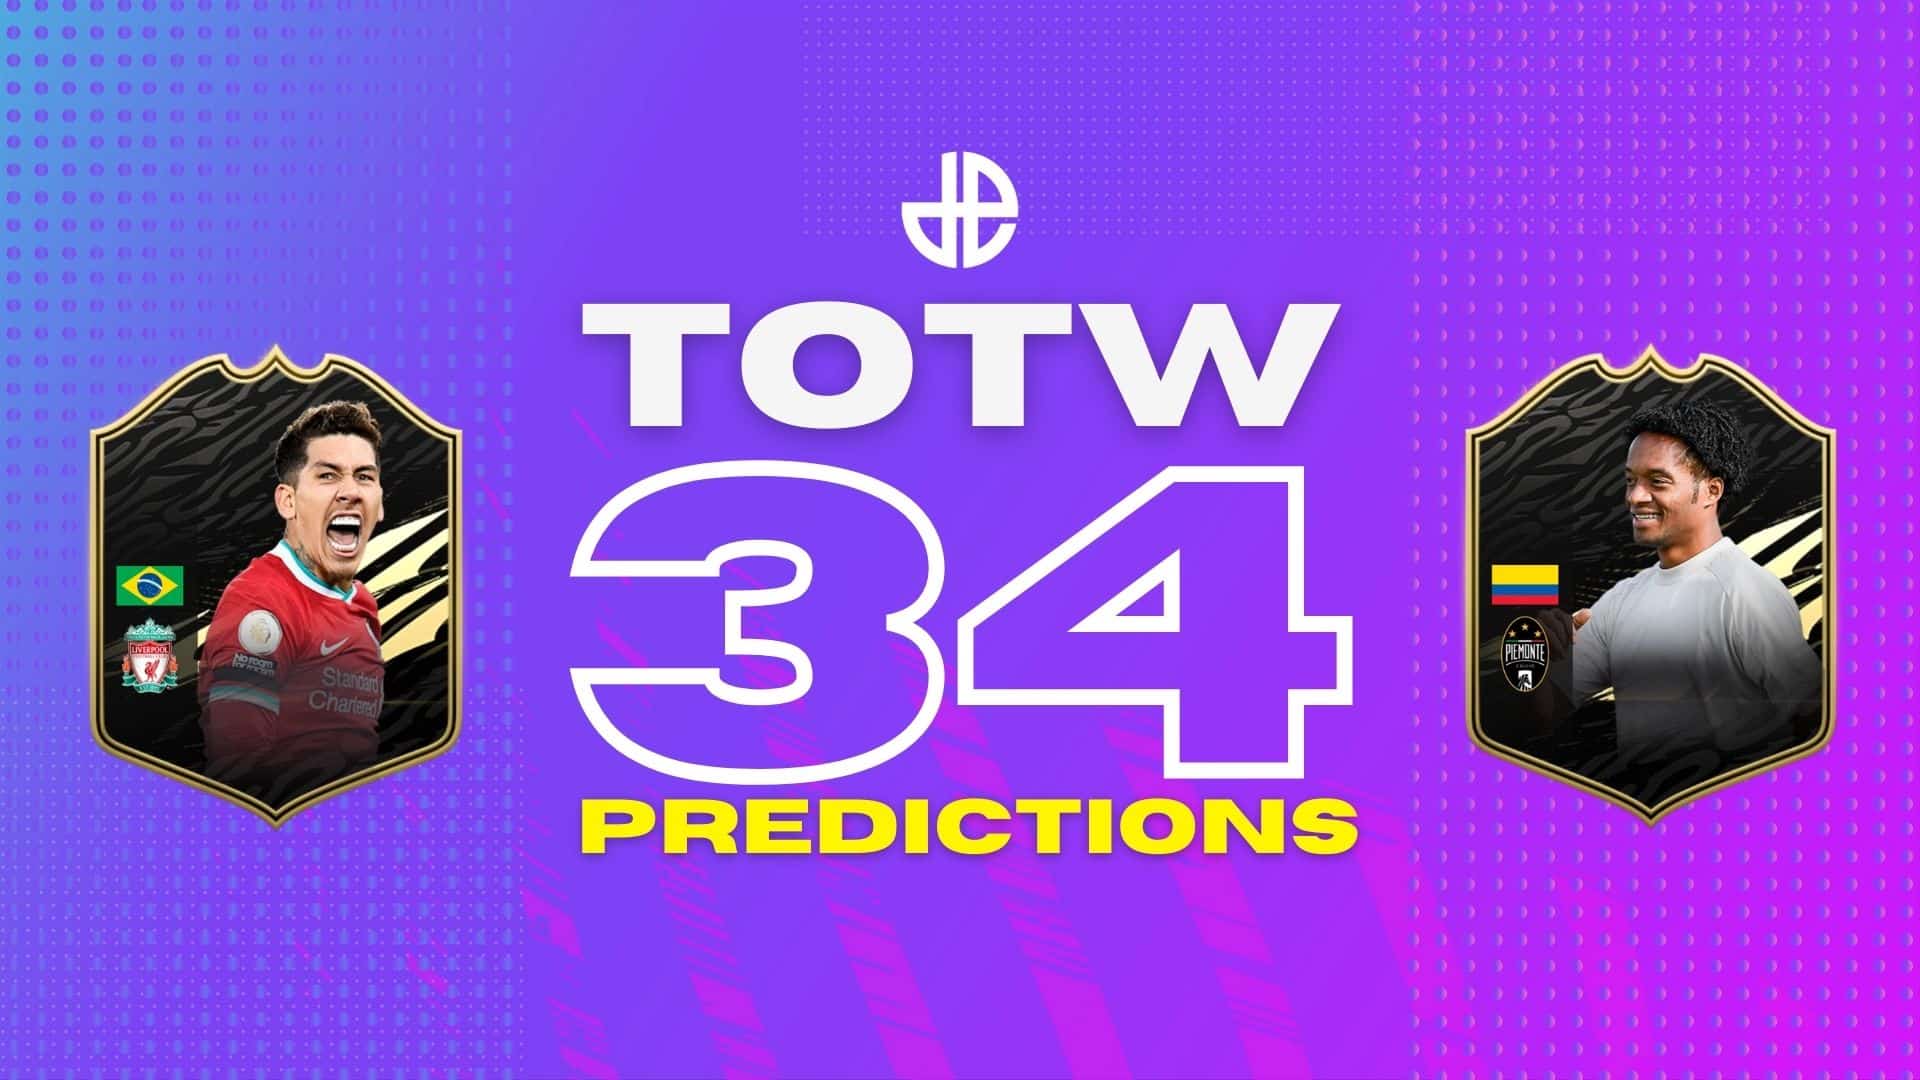 FIFA 21 TOTW 34 predictions with cards